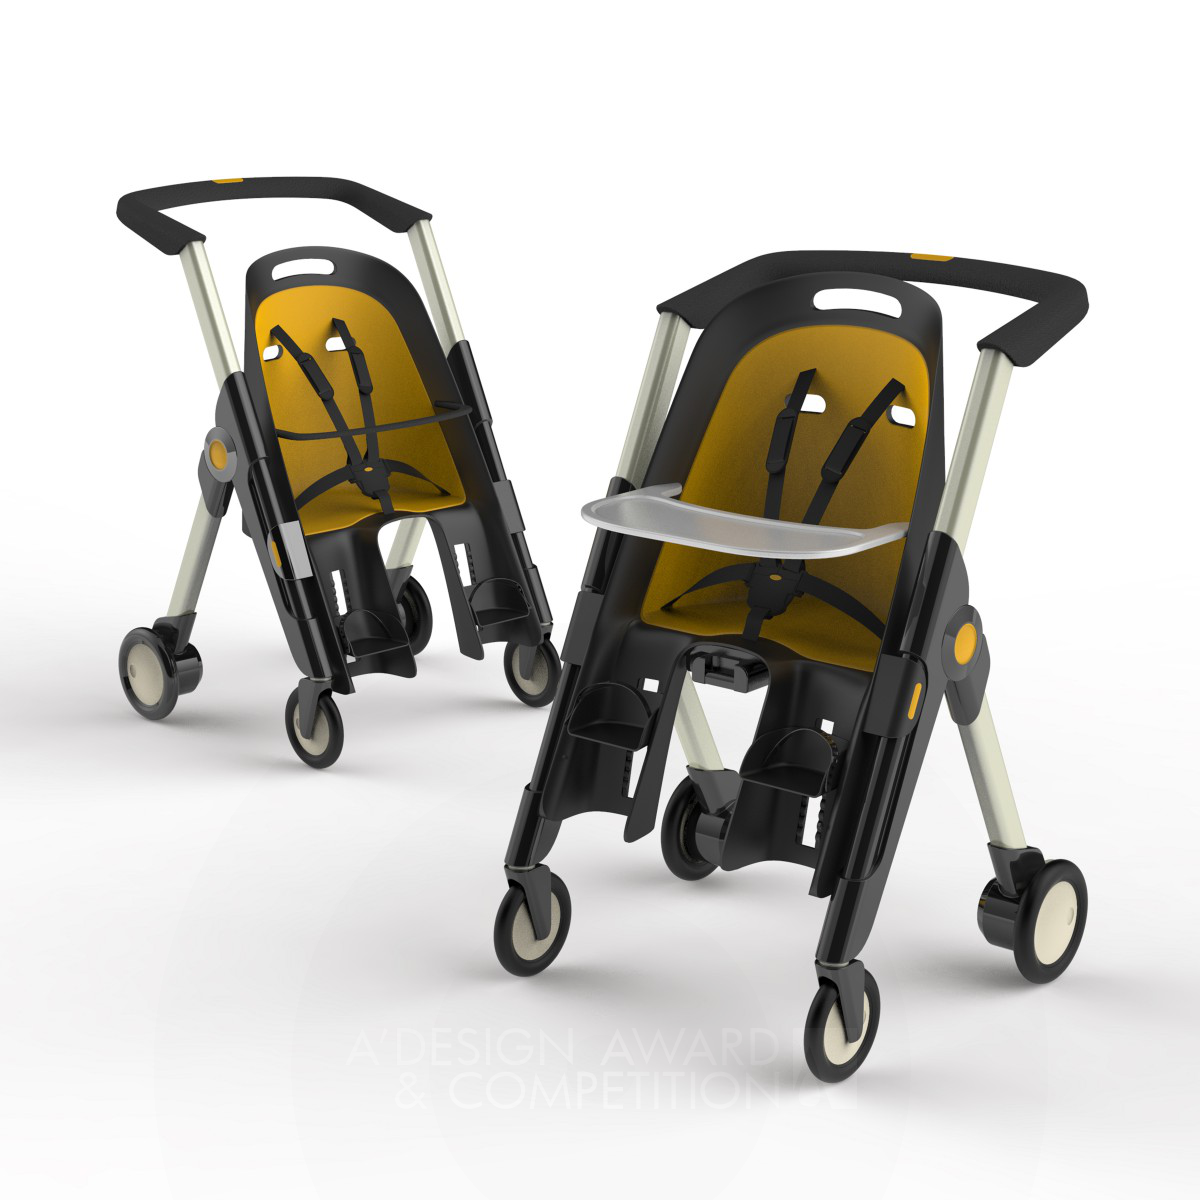 Yuefeng ZHOU wins Bronze at the prestigious A' Baby, Kids and Children's Products Design Award with Evolutionary Stroller.